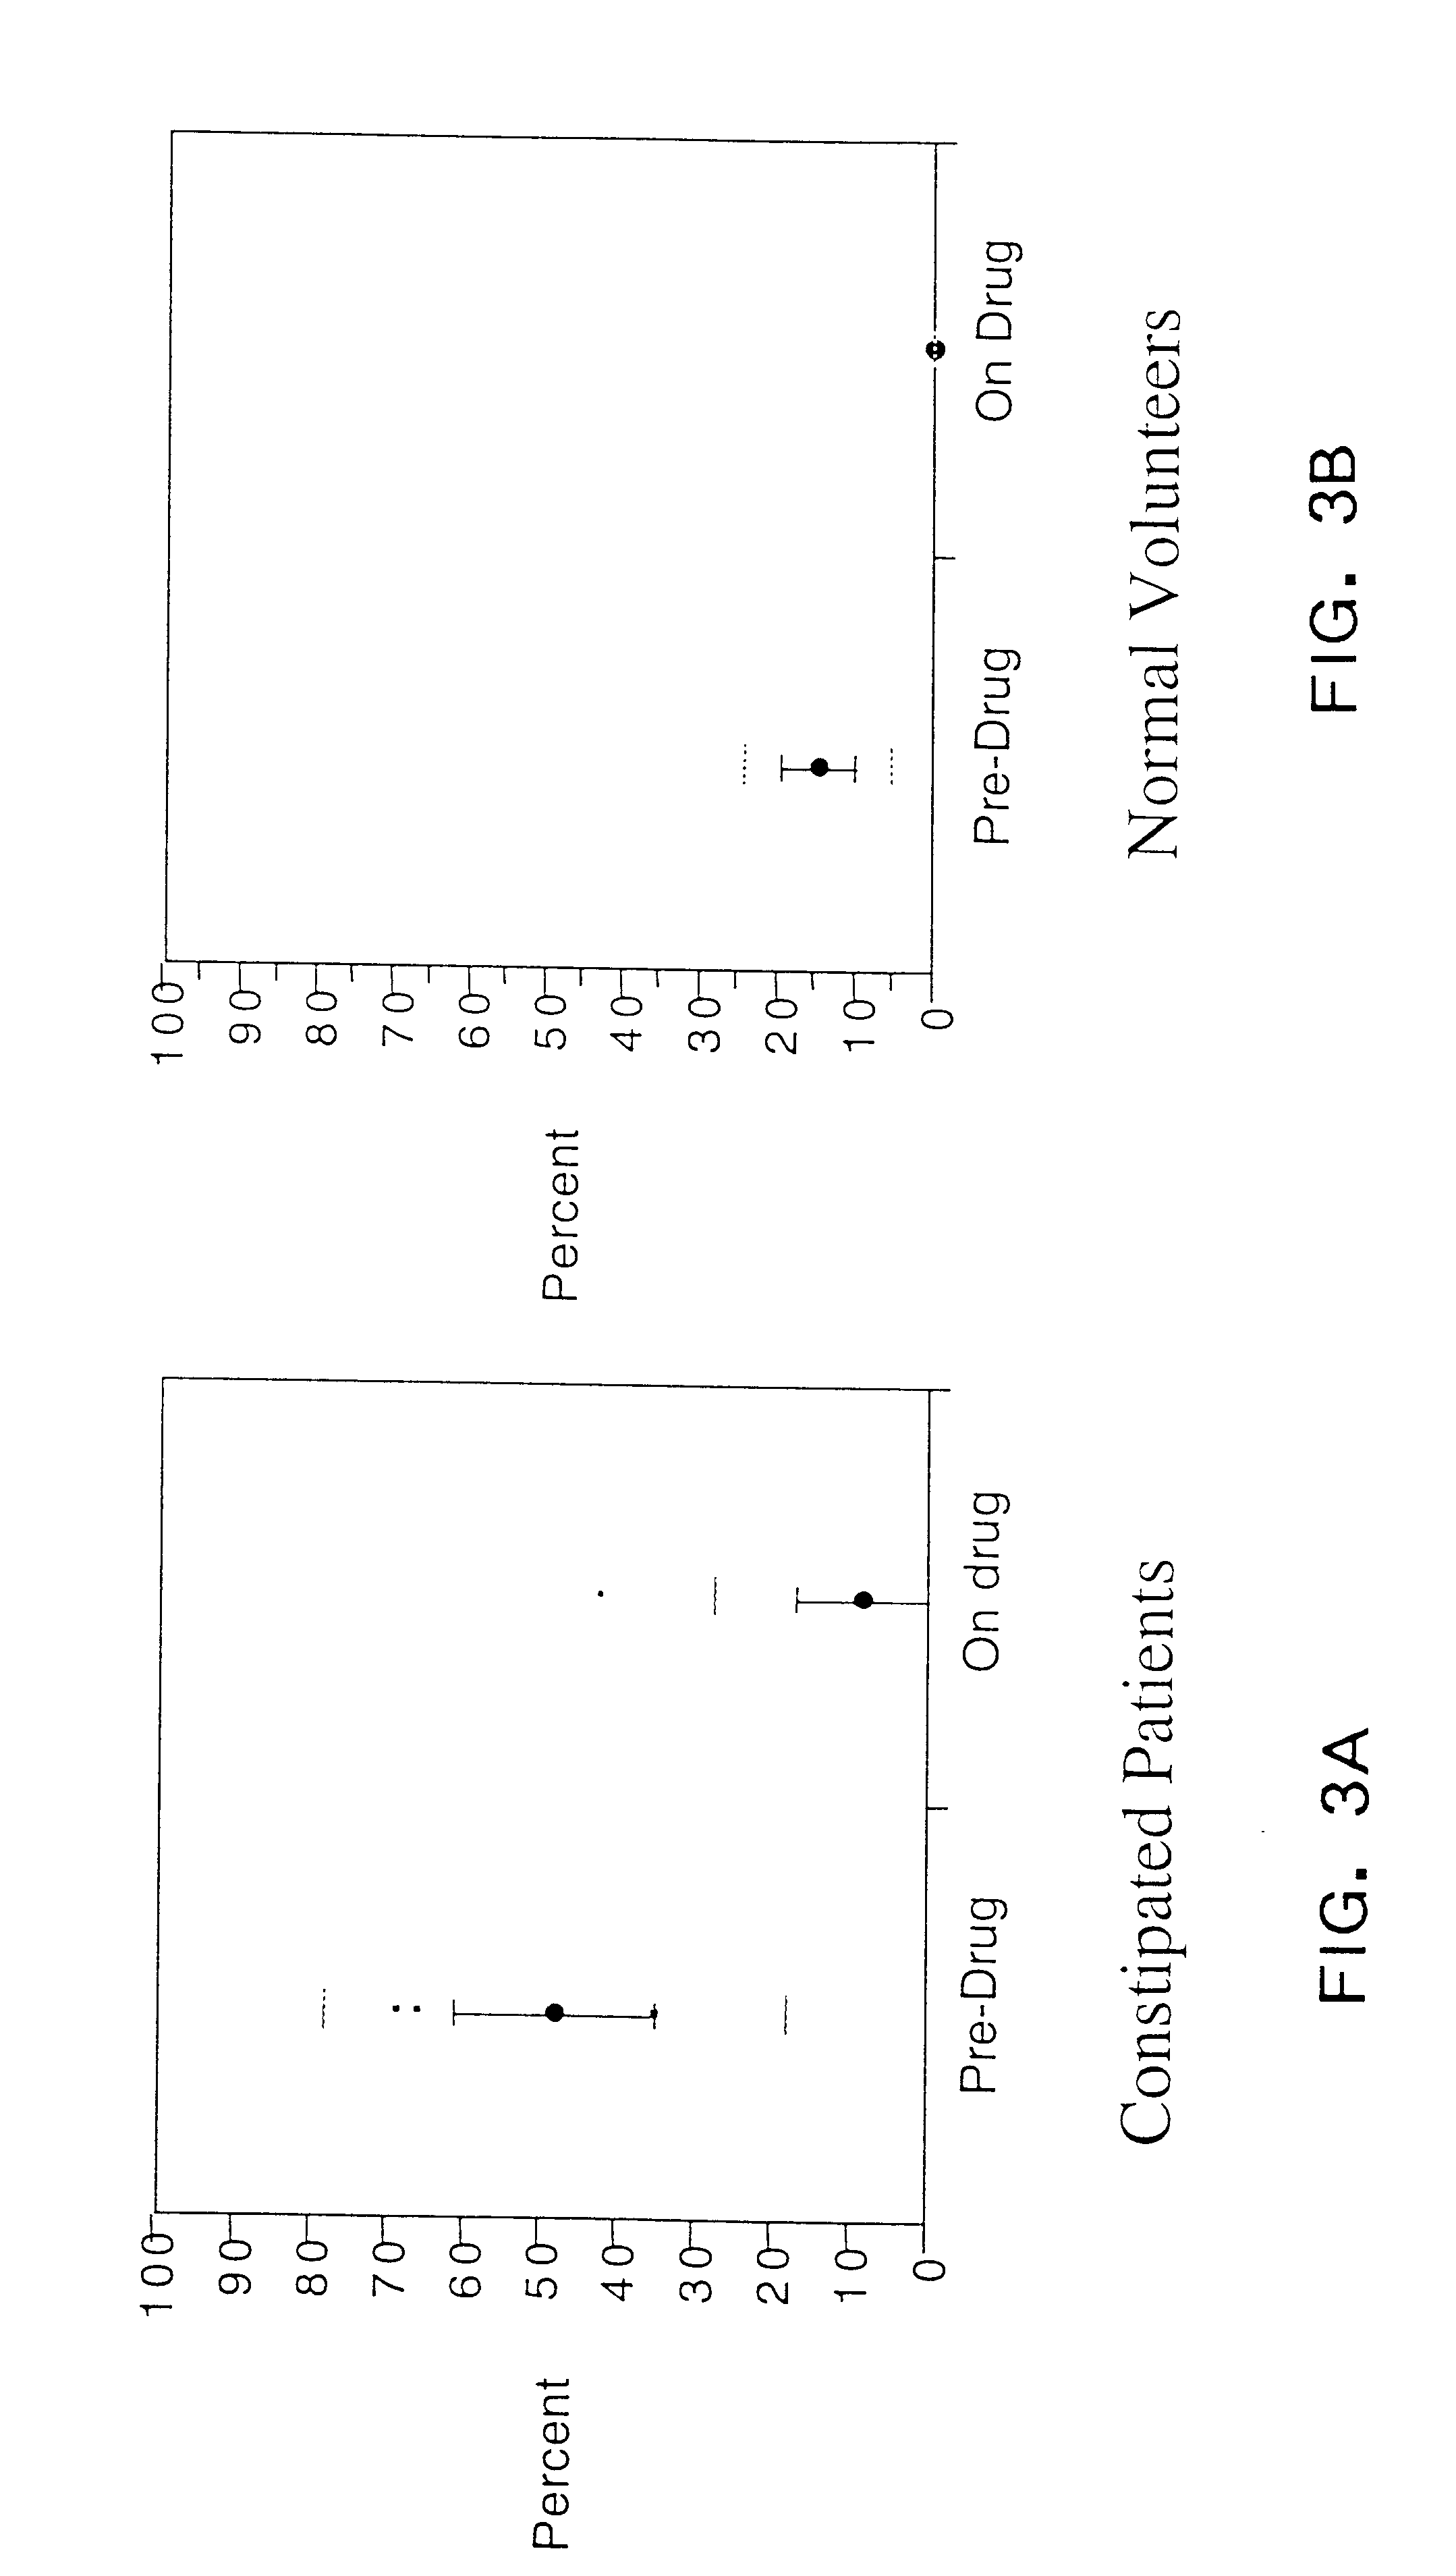 Methods of using a neurotrophin and its analogues for the treatment of gastrointestinal hypomotility disorders